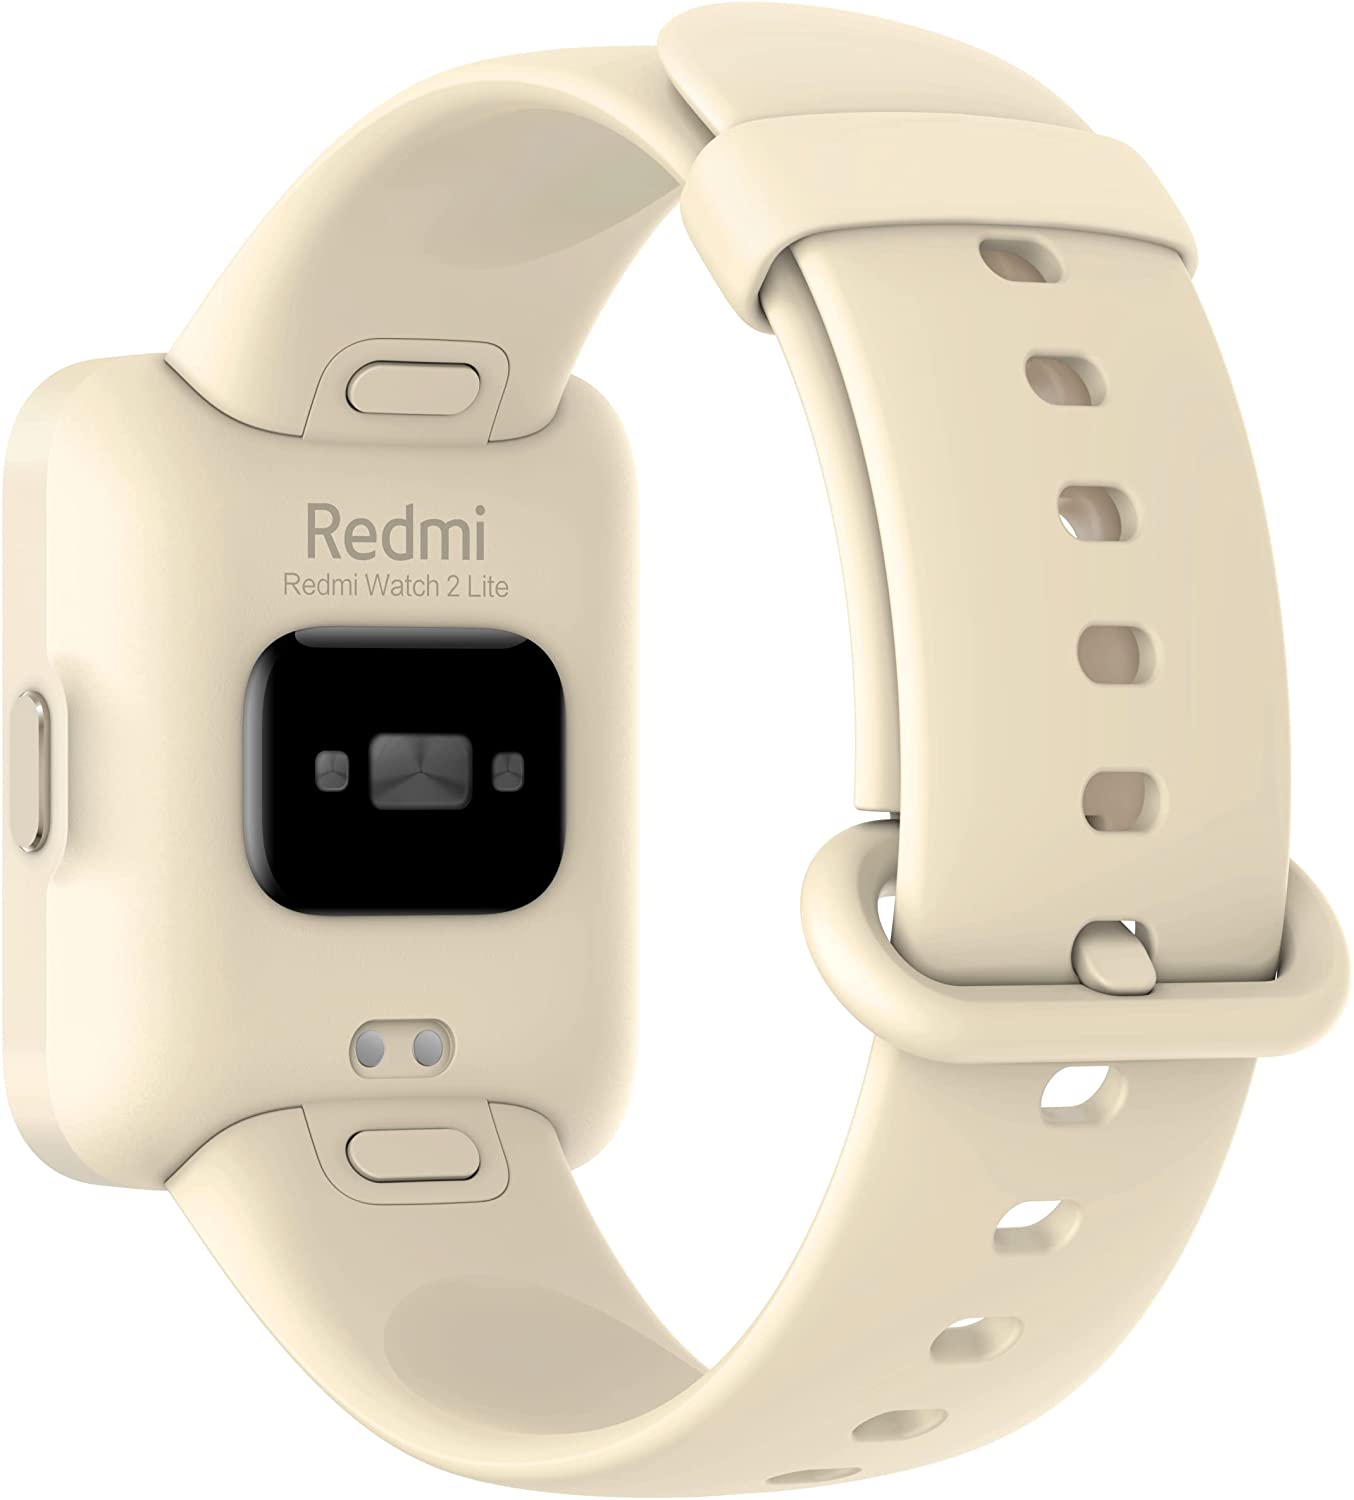 Redmi Smart Watch 2 Lite Beige (Ivory) by Xiaomi - 1.55’’ Touch Screen, 5ATM Water Resistant, 10 Days Battery, GPS, 100+ Sports Mode, Steps, Sleep, Heart Rate Monitor, Fitness Activity Tracker